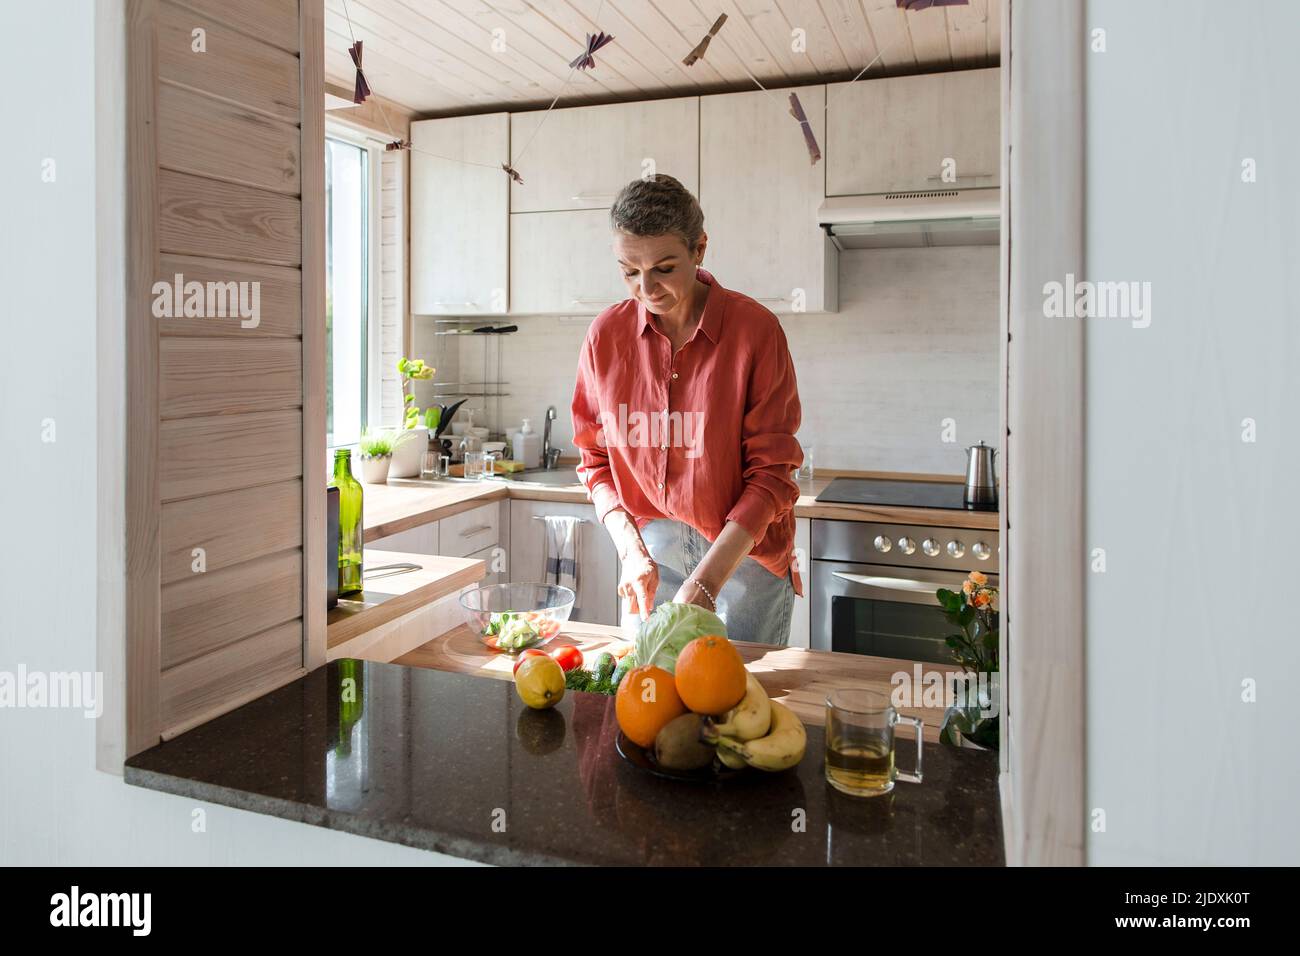 Woman preparing salad in kitchen at home Stock Photo